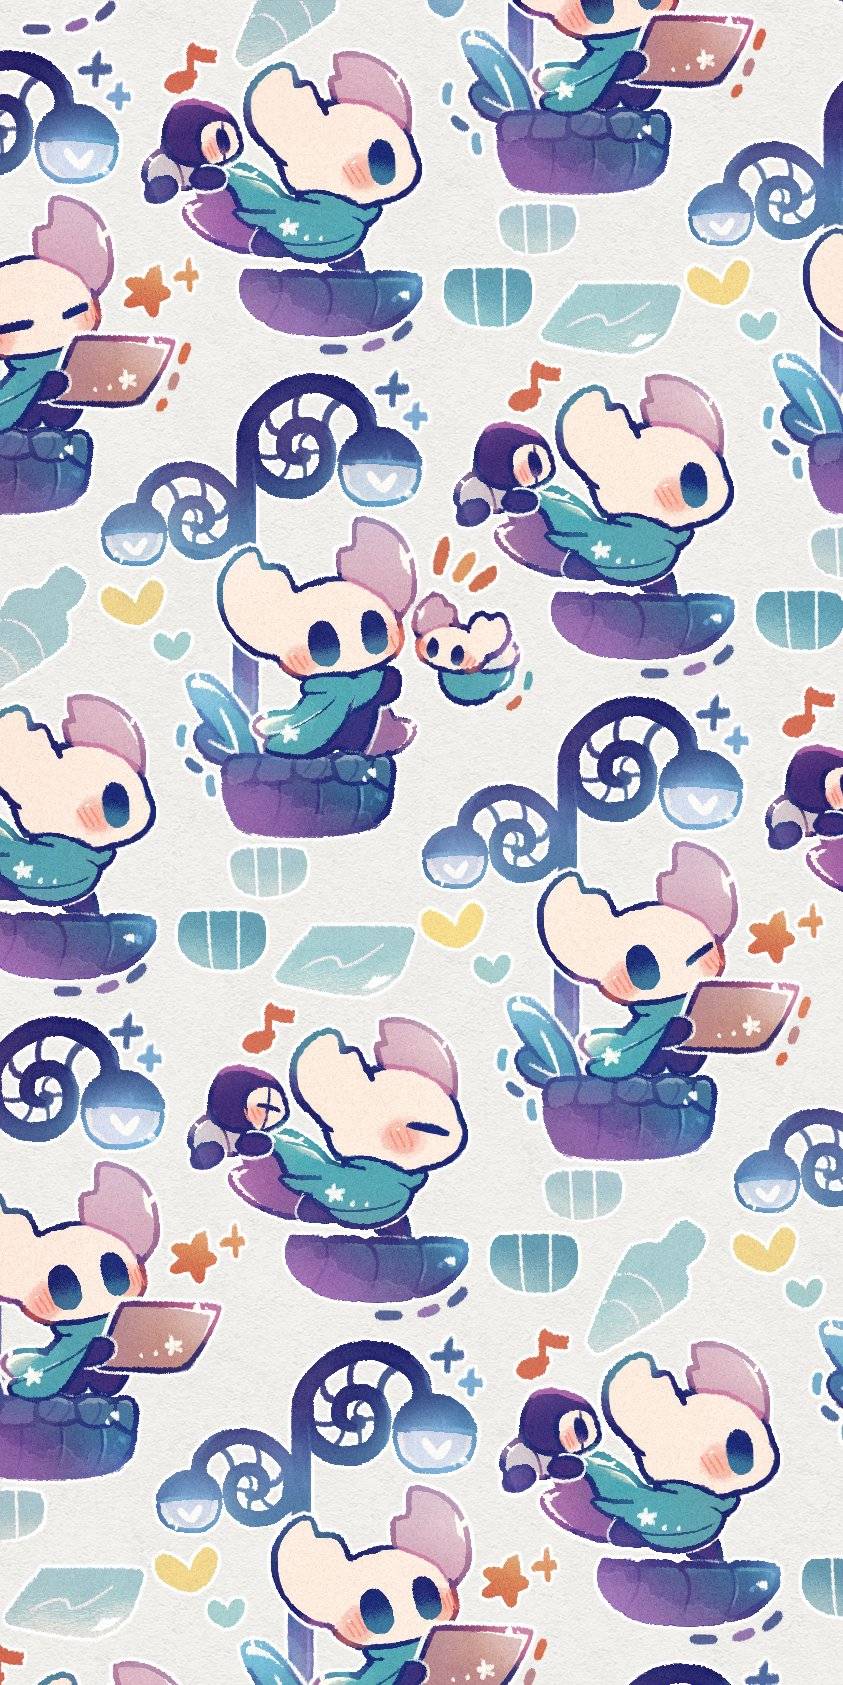 A pattern featuring the Knight from Hollow Knight 